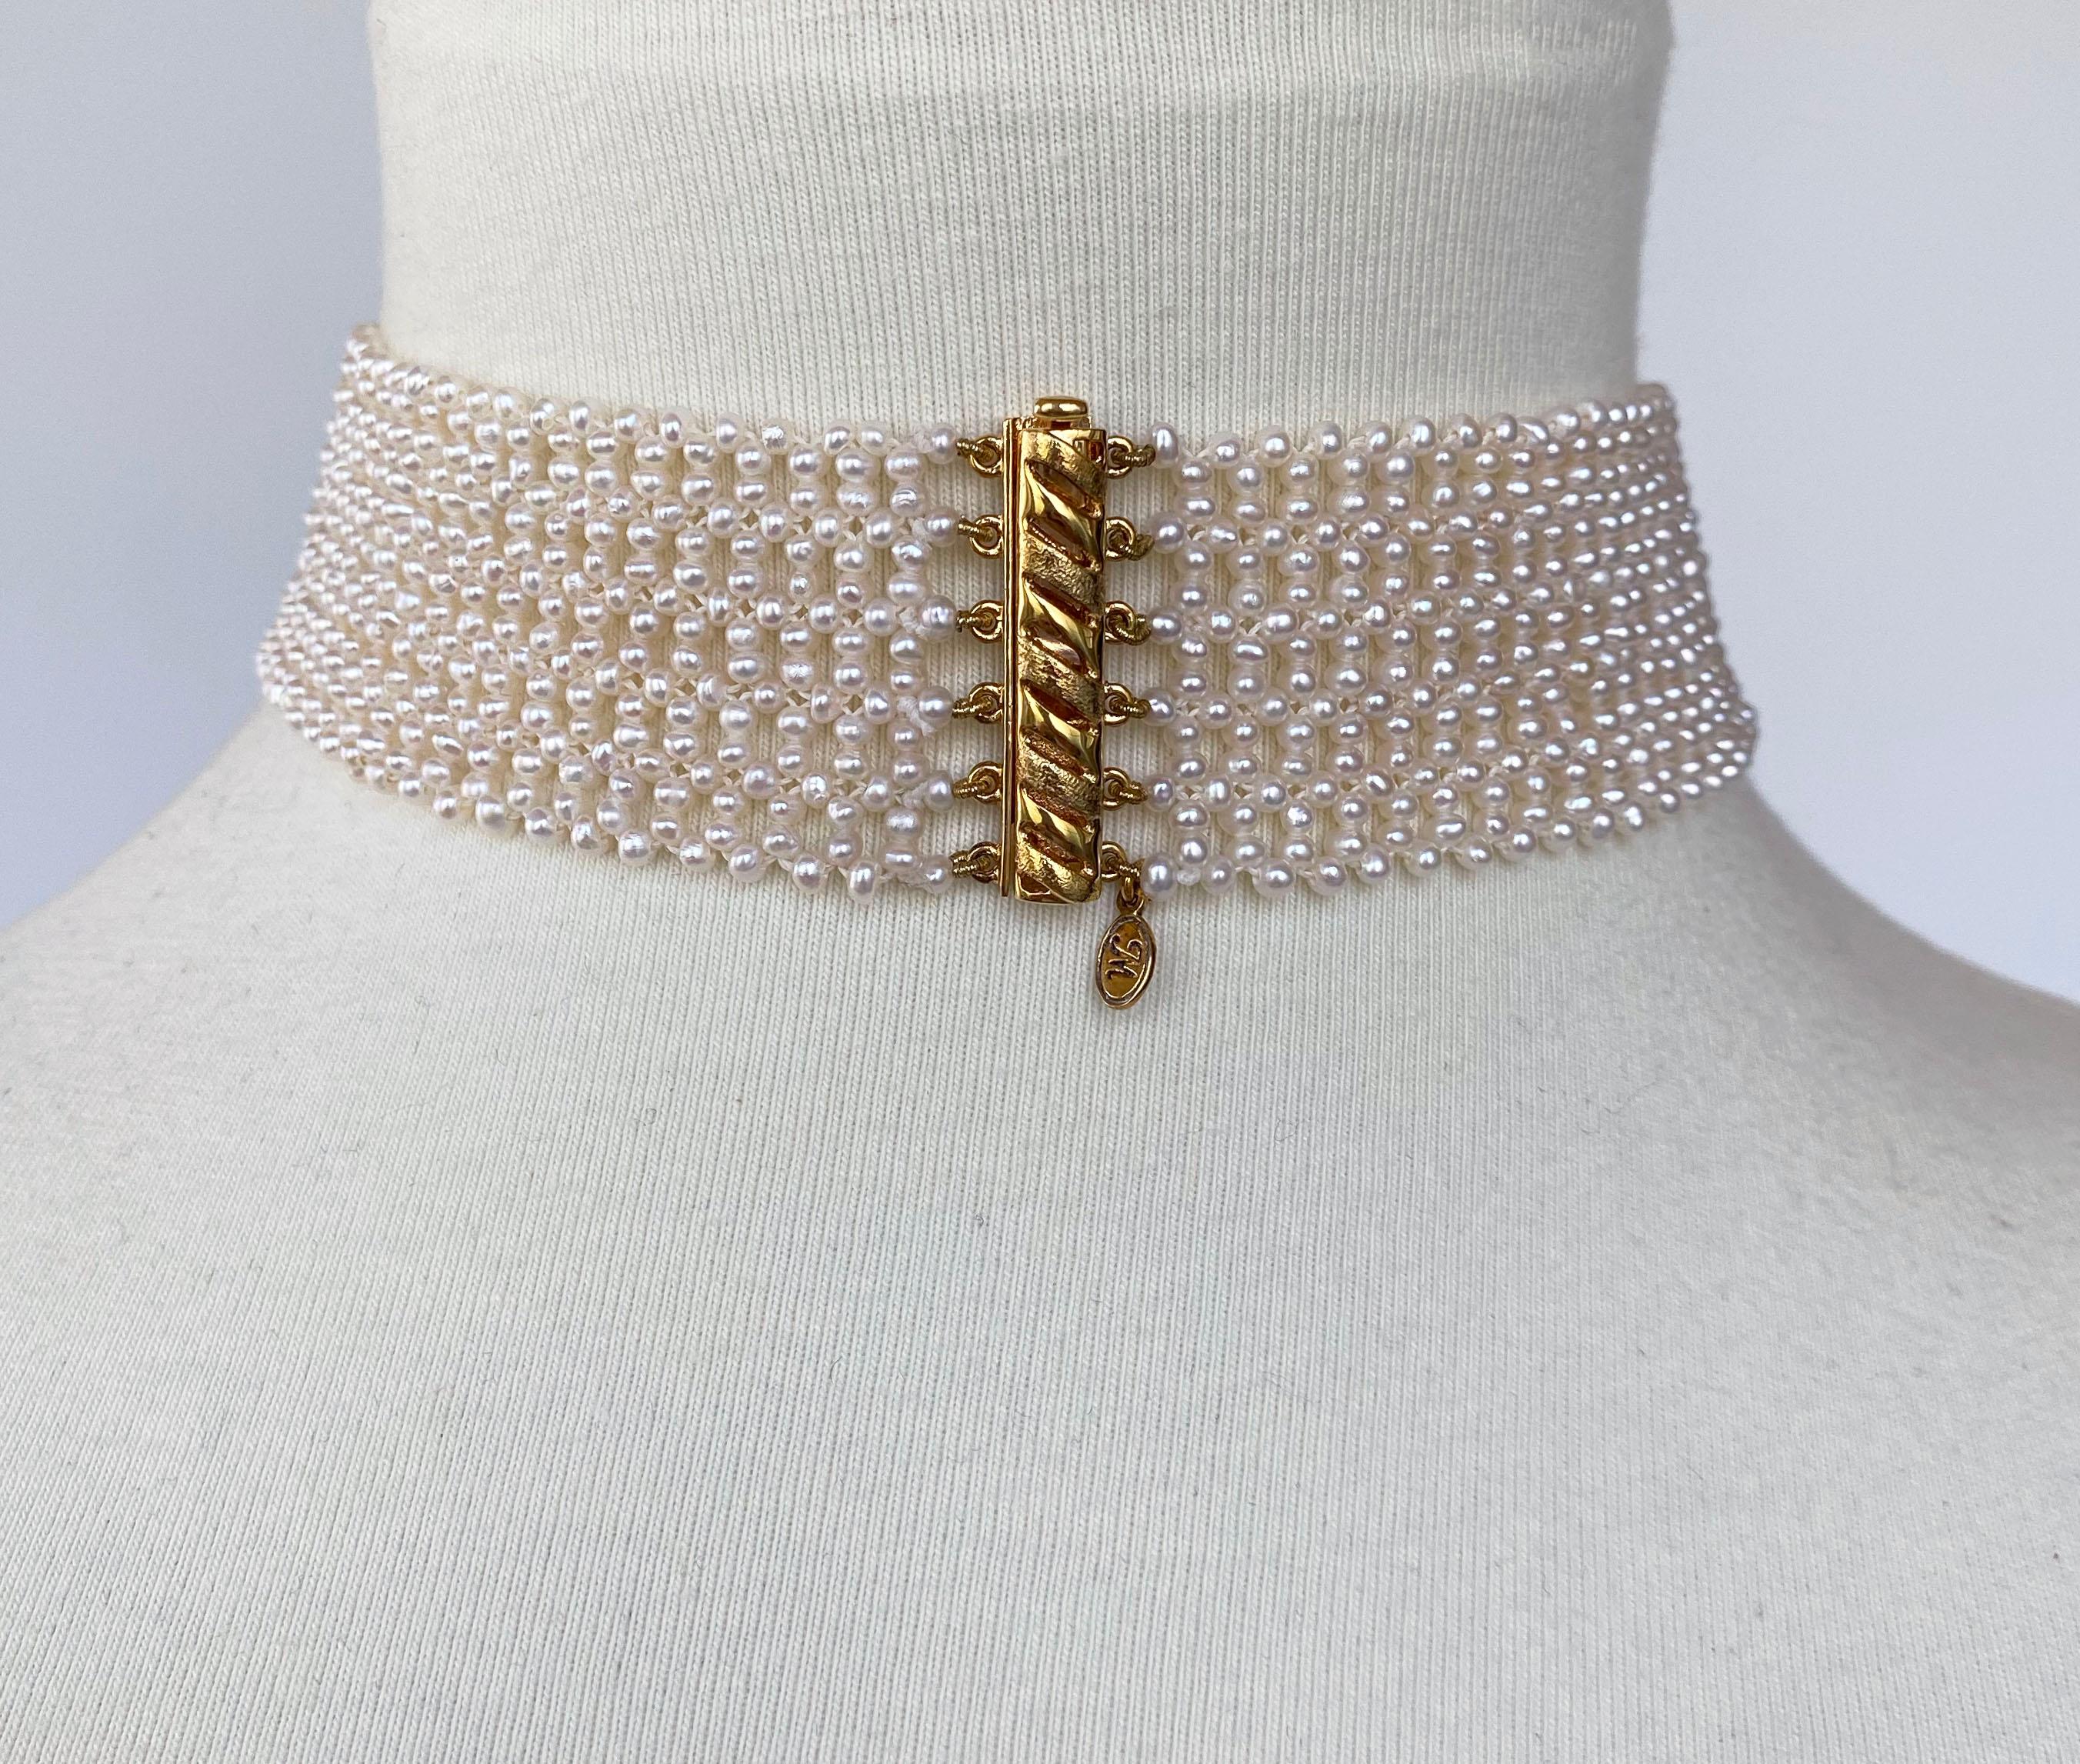 Artisan Marina J Intricately Woven White Seed Pearl Choker with Gold plated Silver Clasp